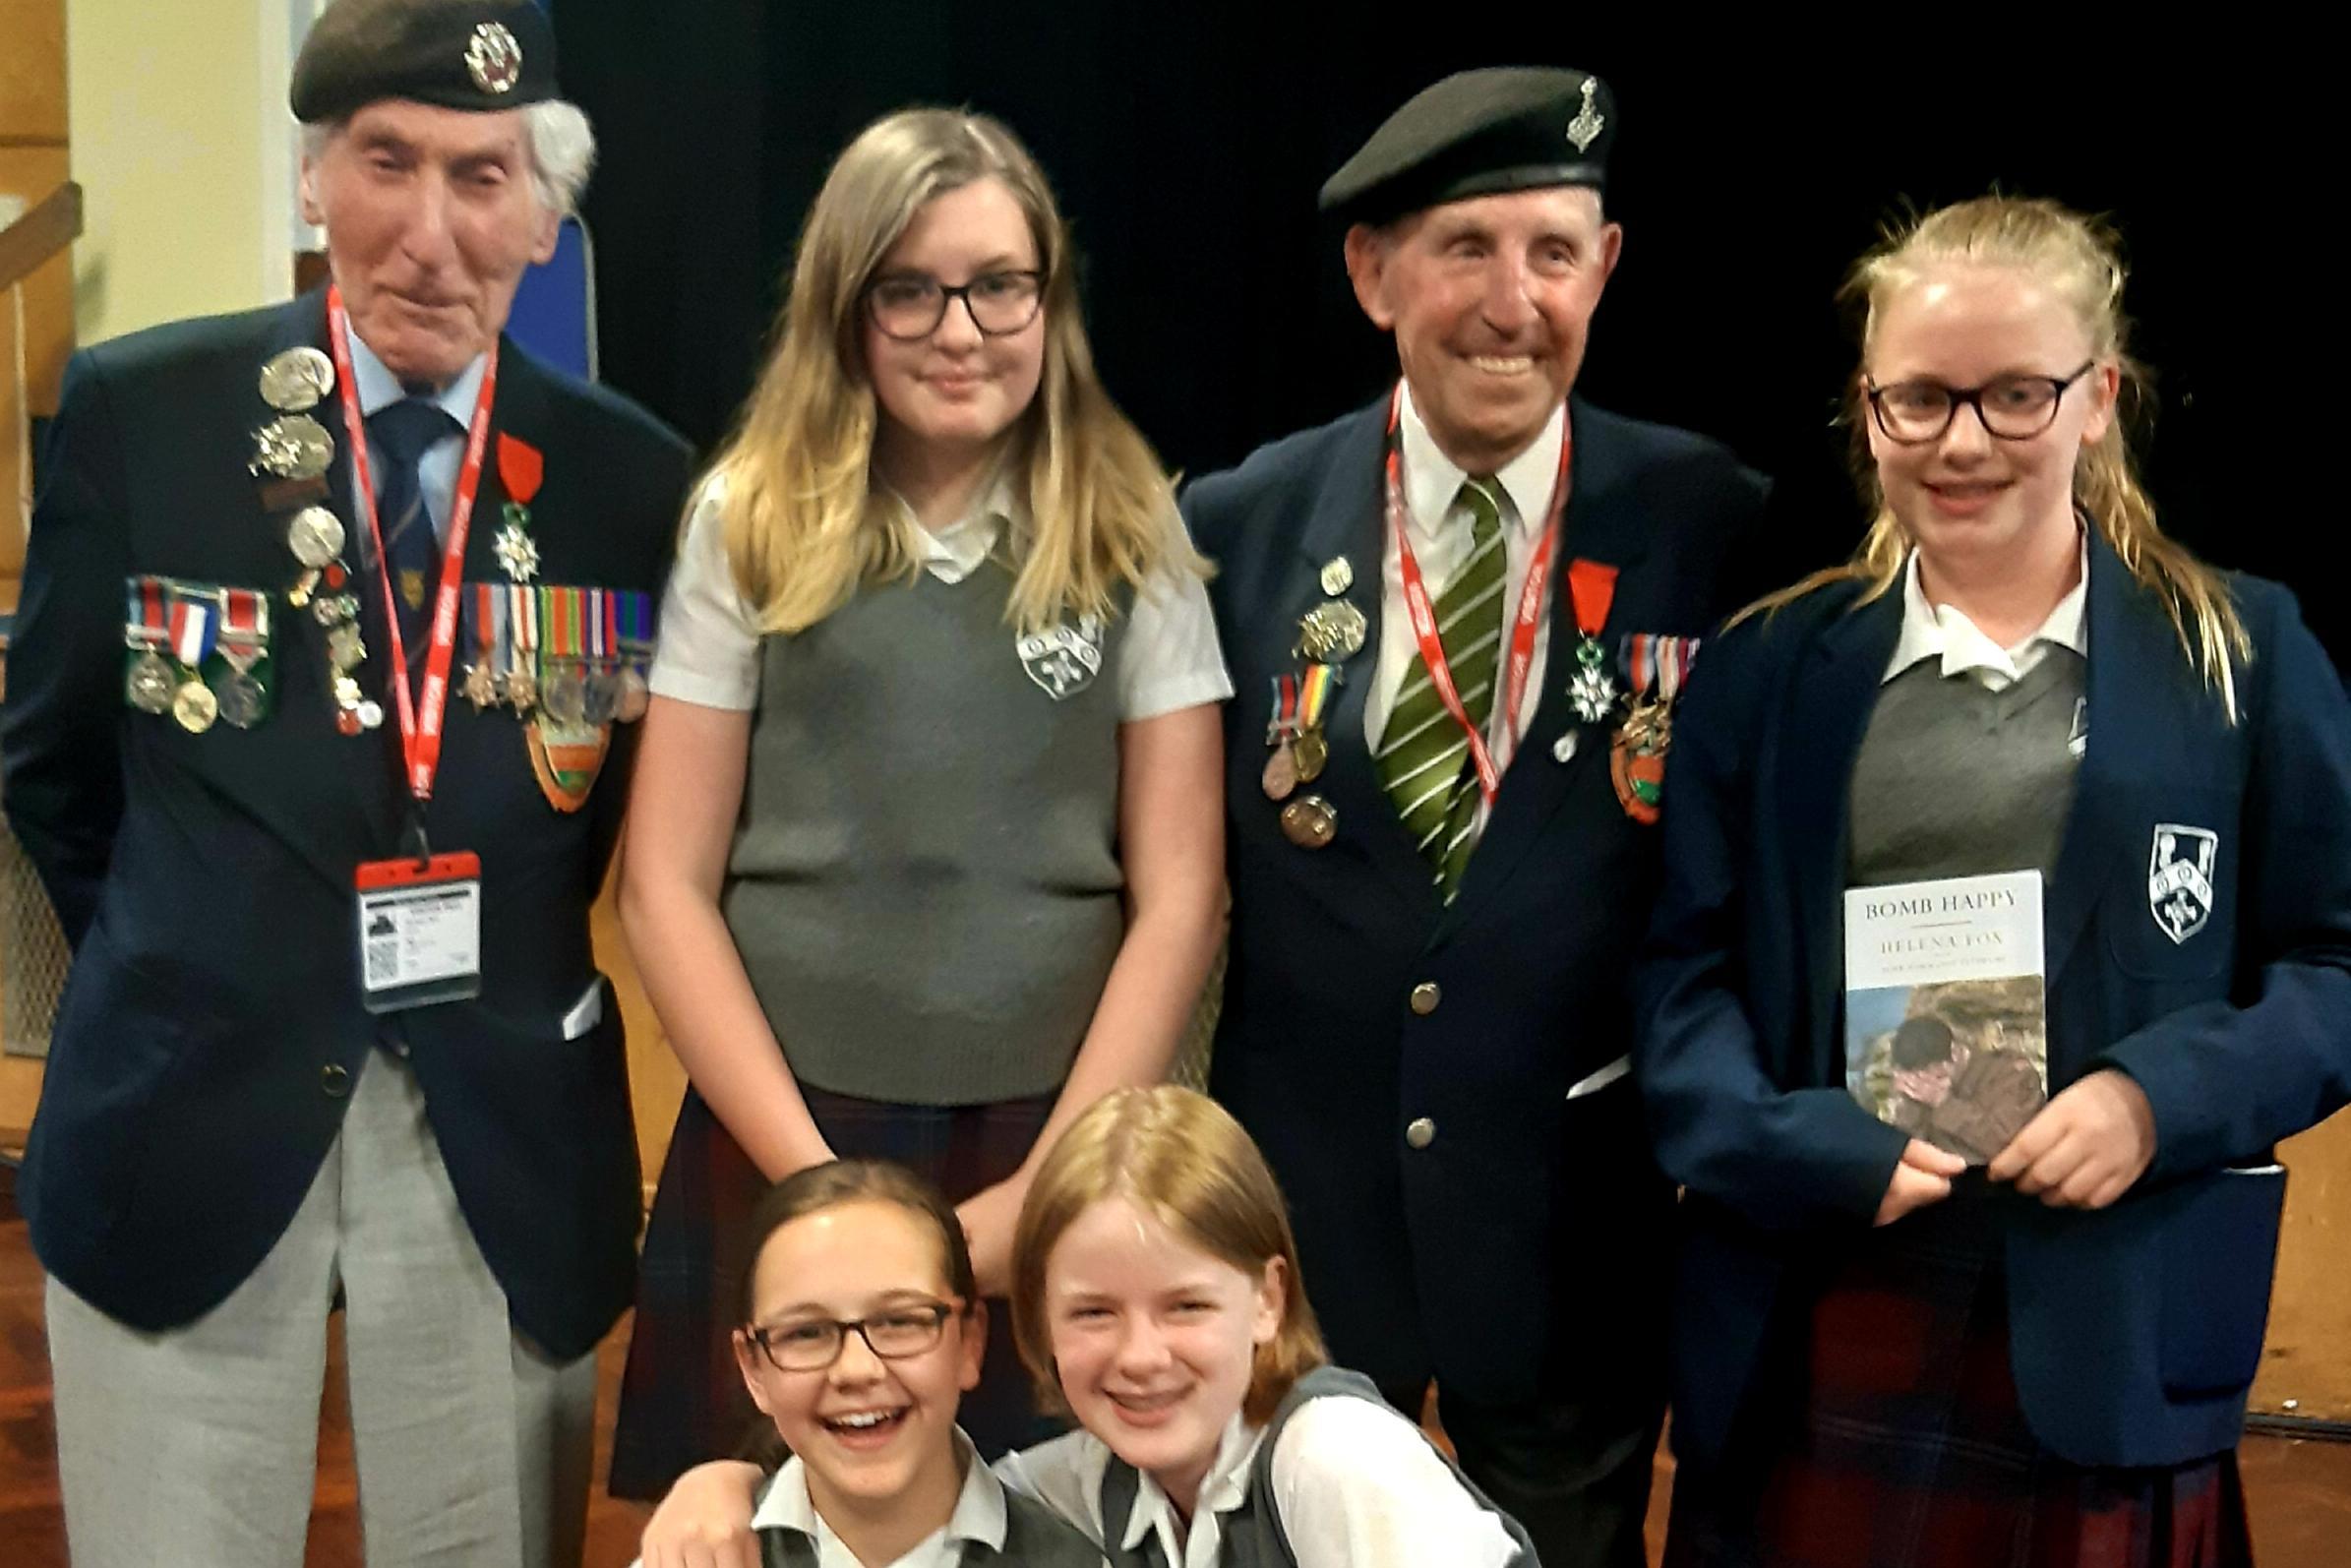 D-Day veterans drop in for play at North Yorkshire school